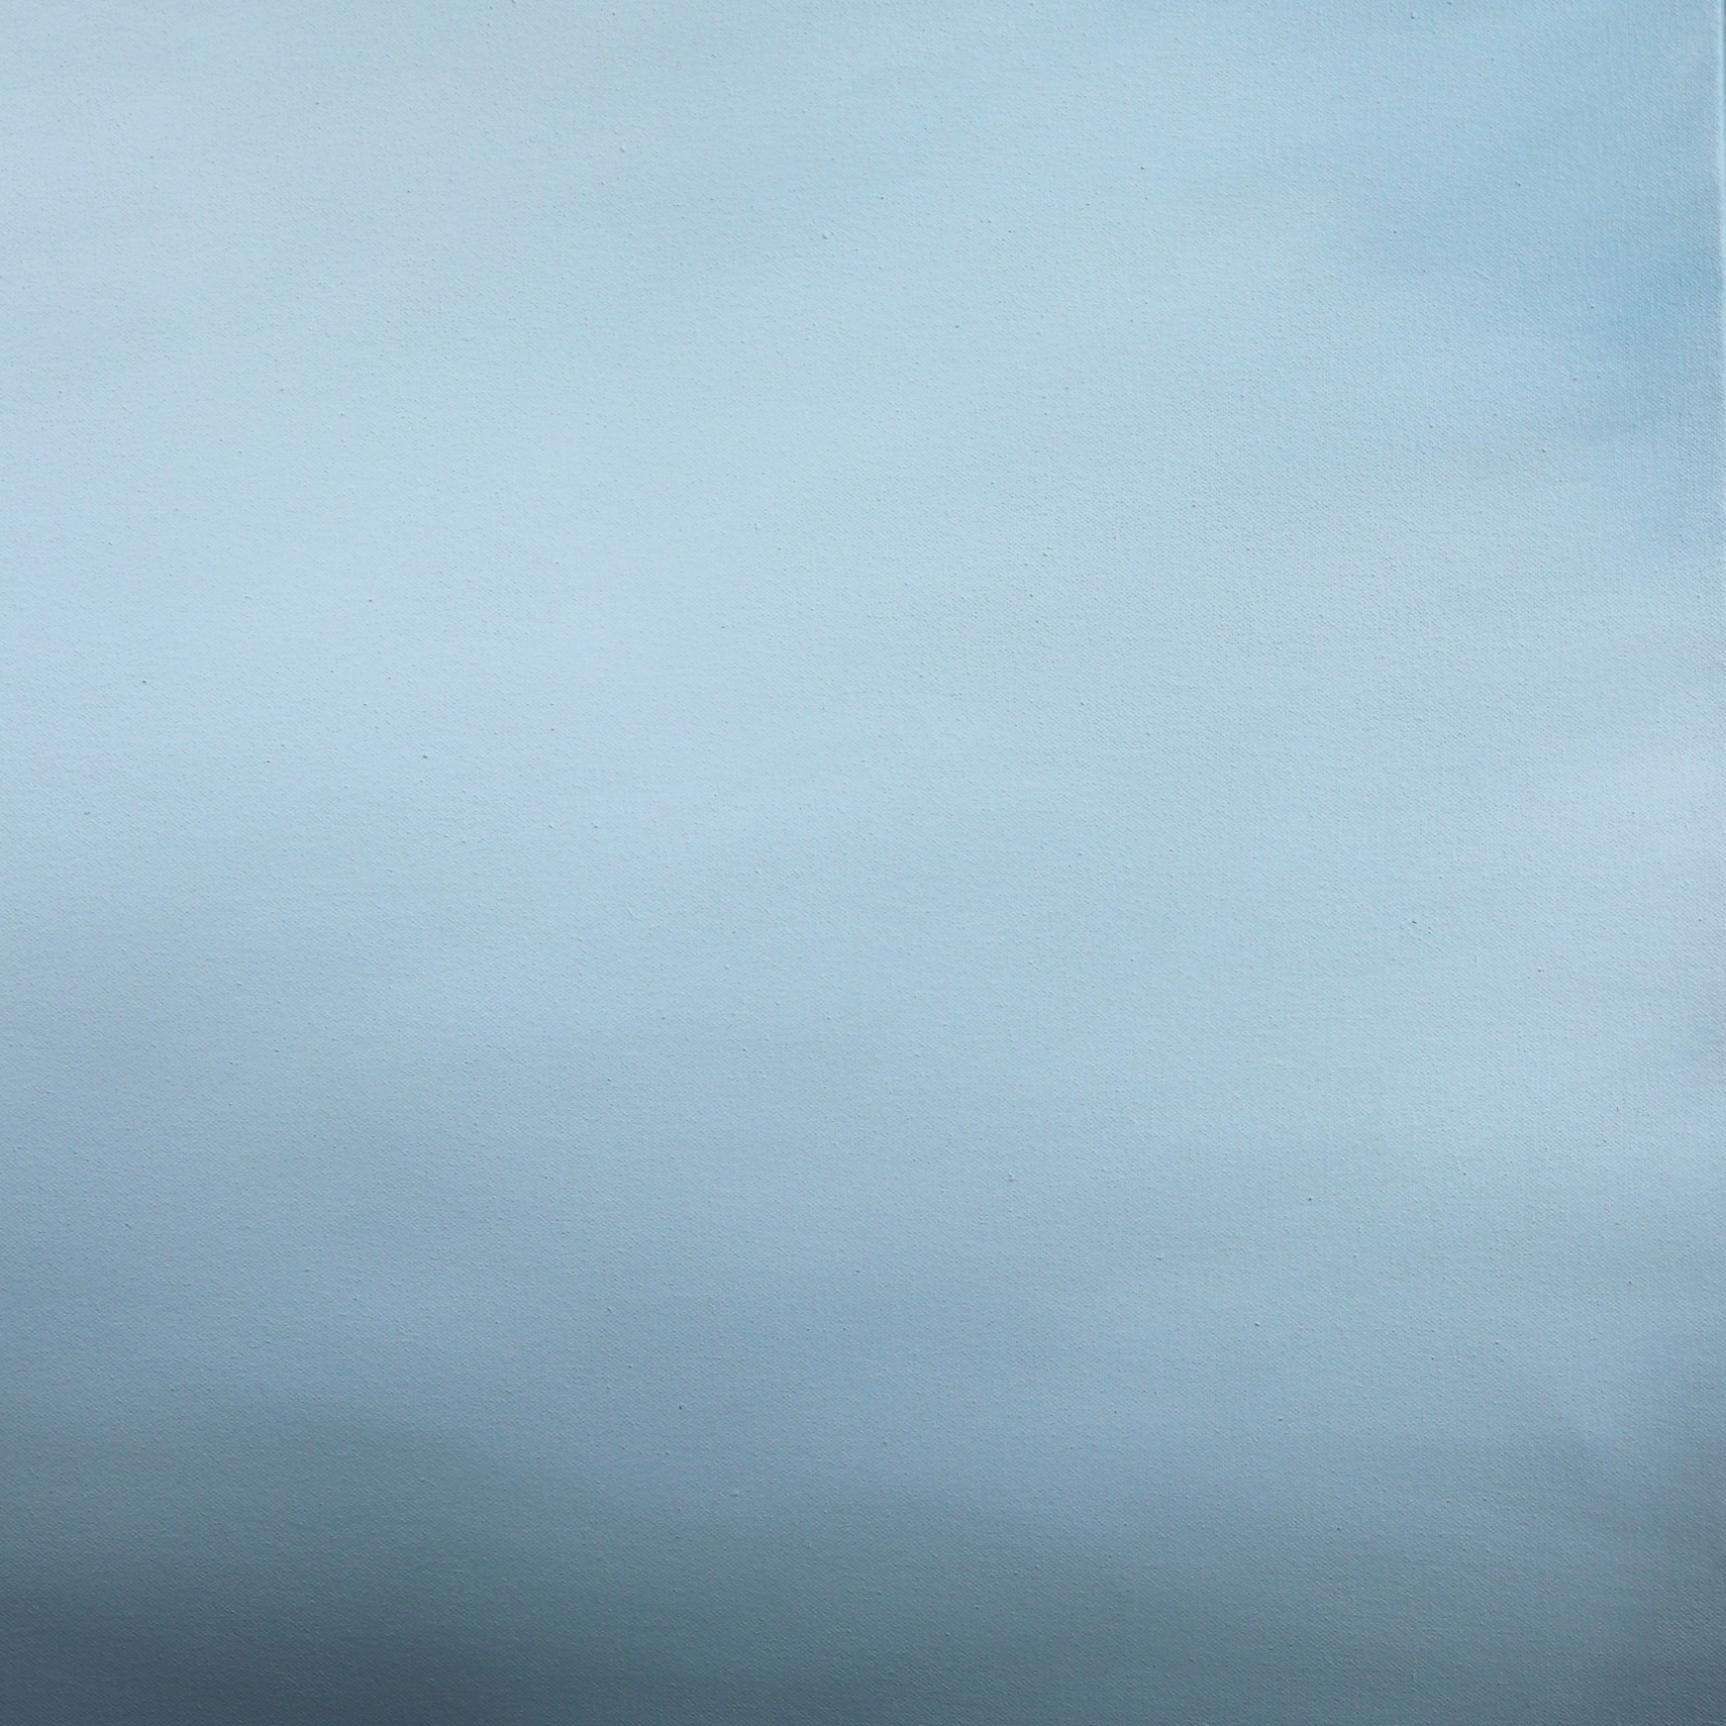 This stunning artwork by Jeremy Prim is a minimalist masterpiece that exudes tranquility and captures the essence of the Pacific coastline. The painting features a serene blue color palette that evokes a sense of calm and serenity. The bottom half